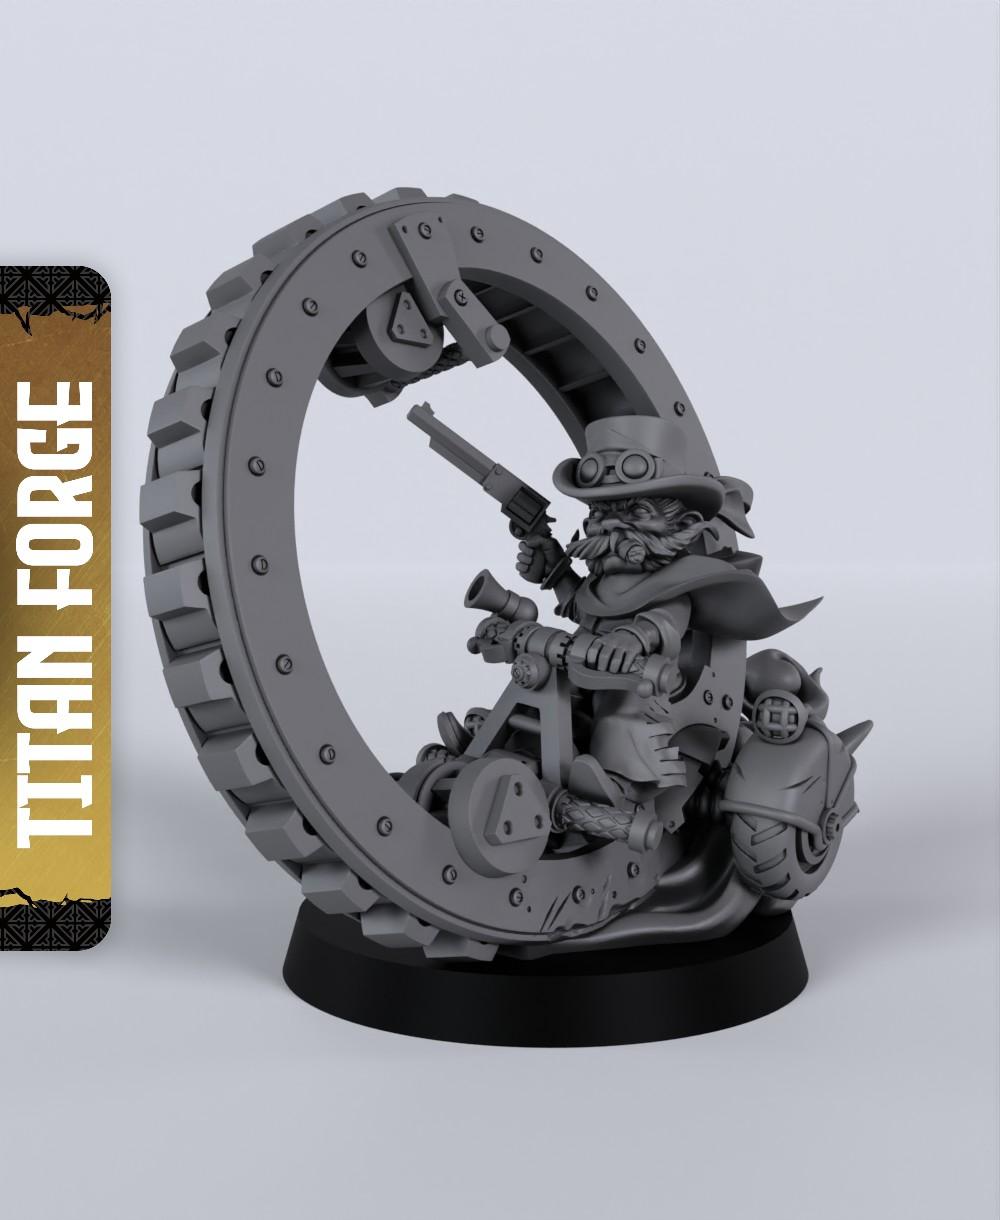 Gnome Rider - With Free Dragon Warhammer - 5e DnD Inspired for RPG and Wargamers 3d model